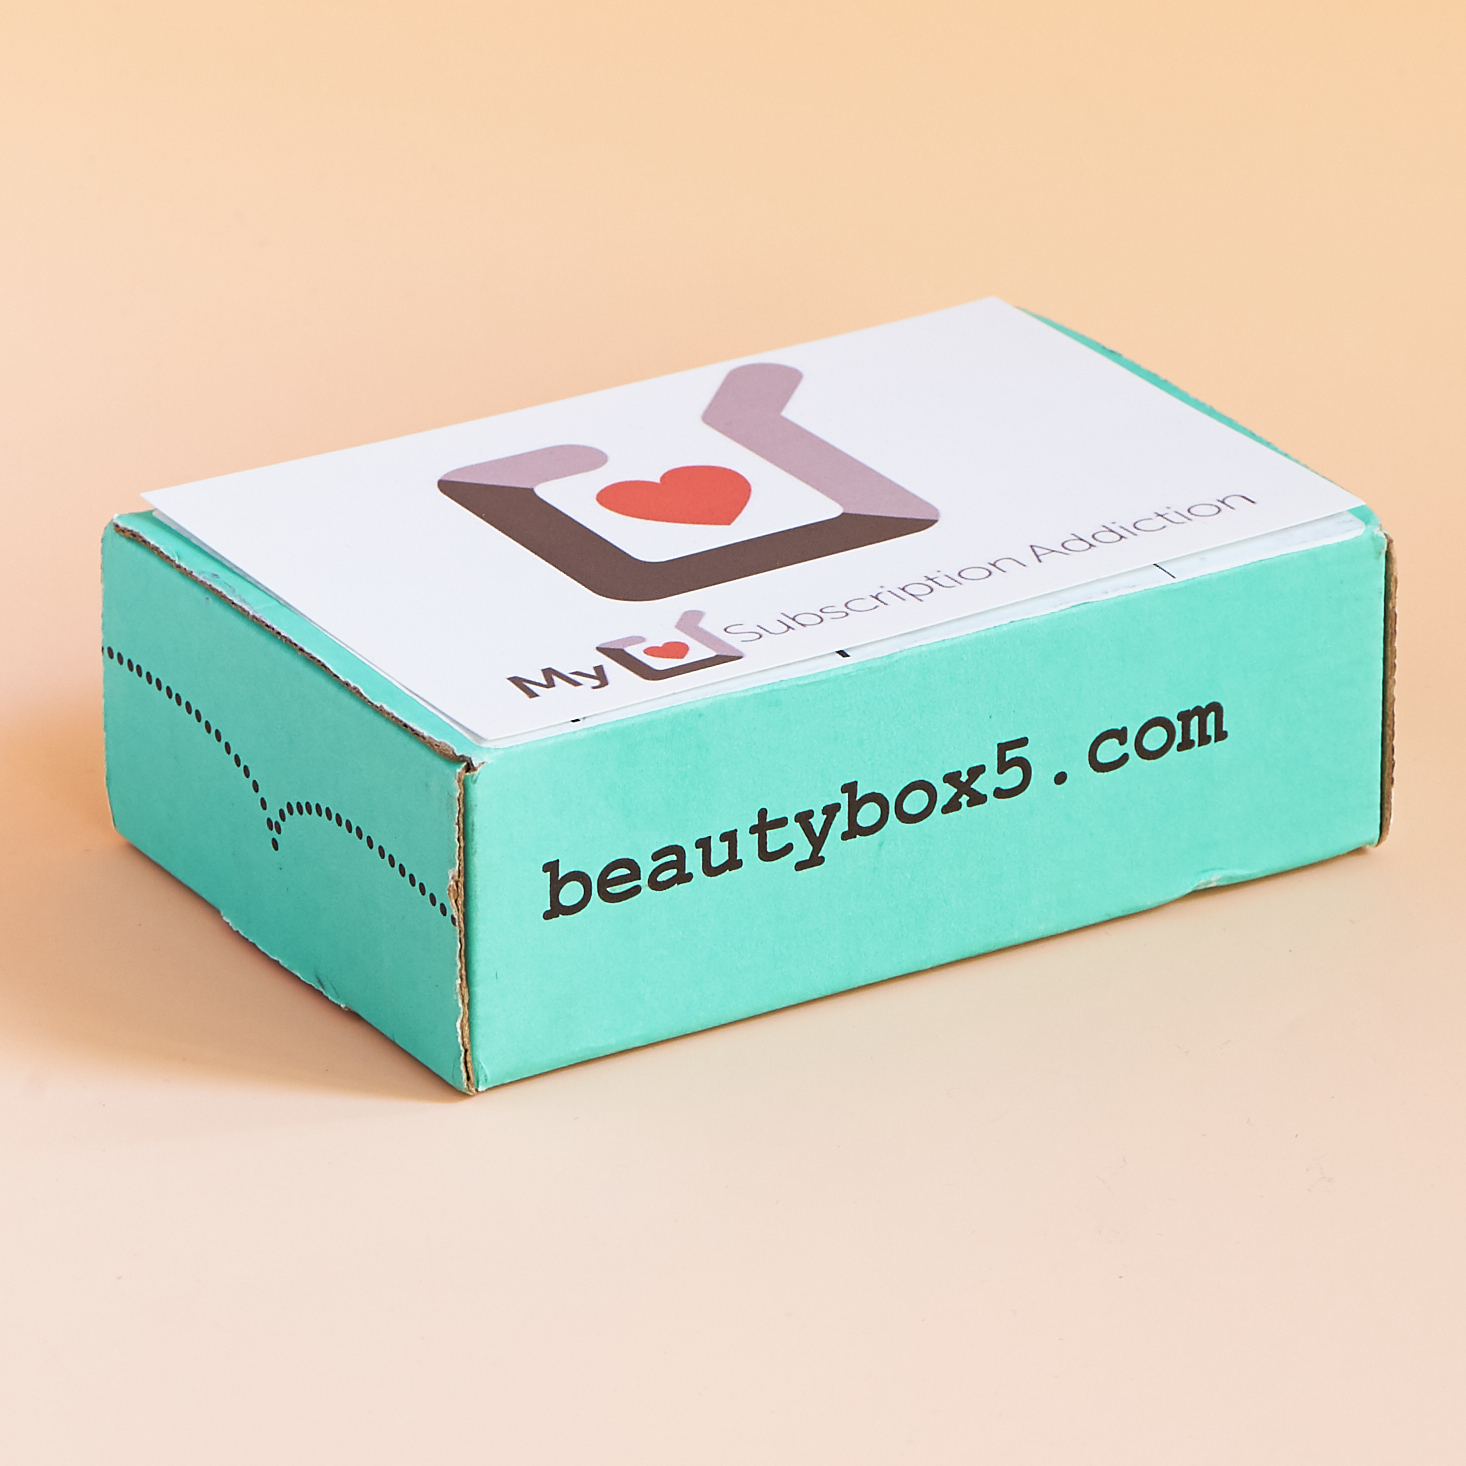 Beauty Box 5 Subscription Review + Coupon – October 2016